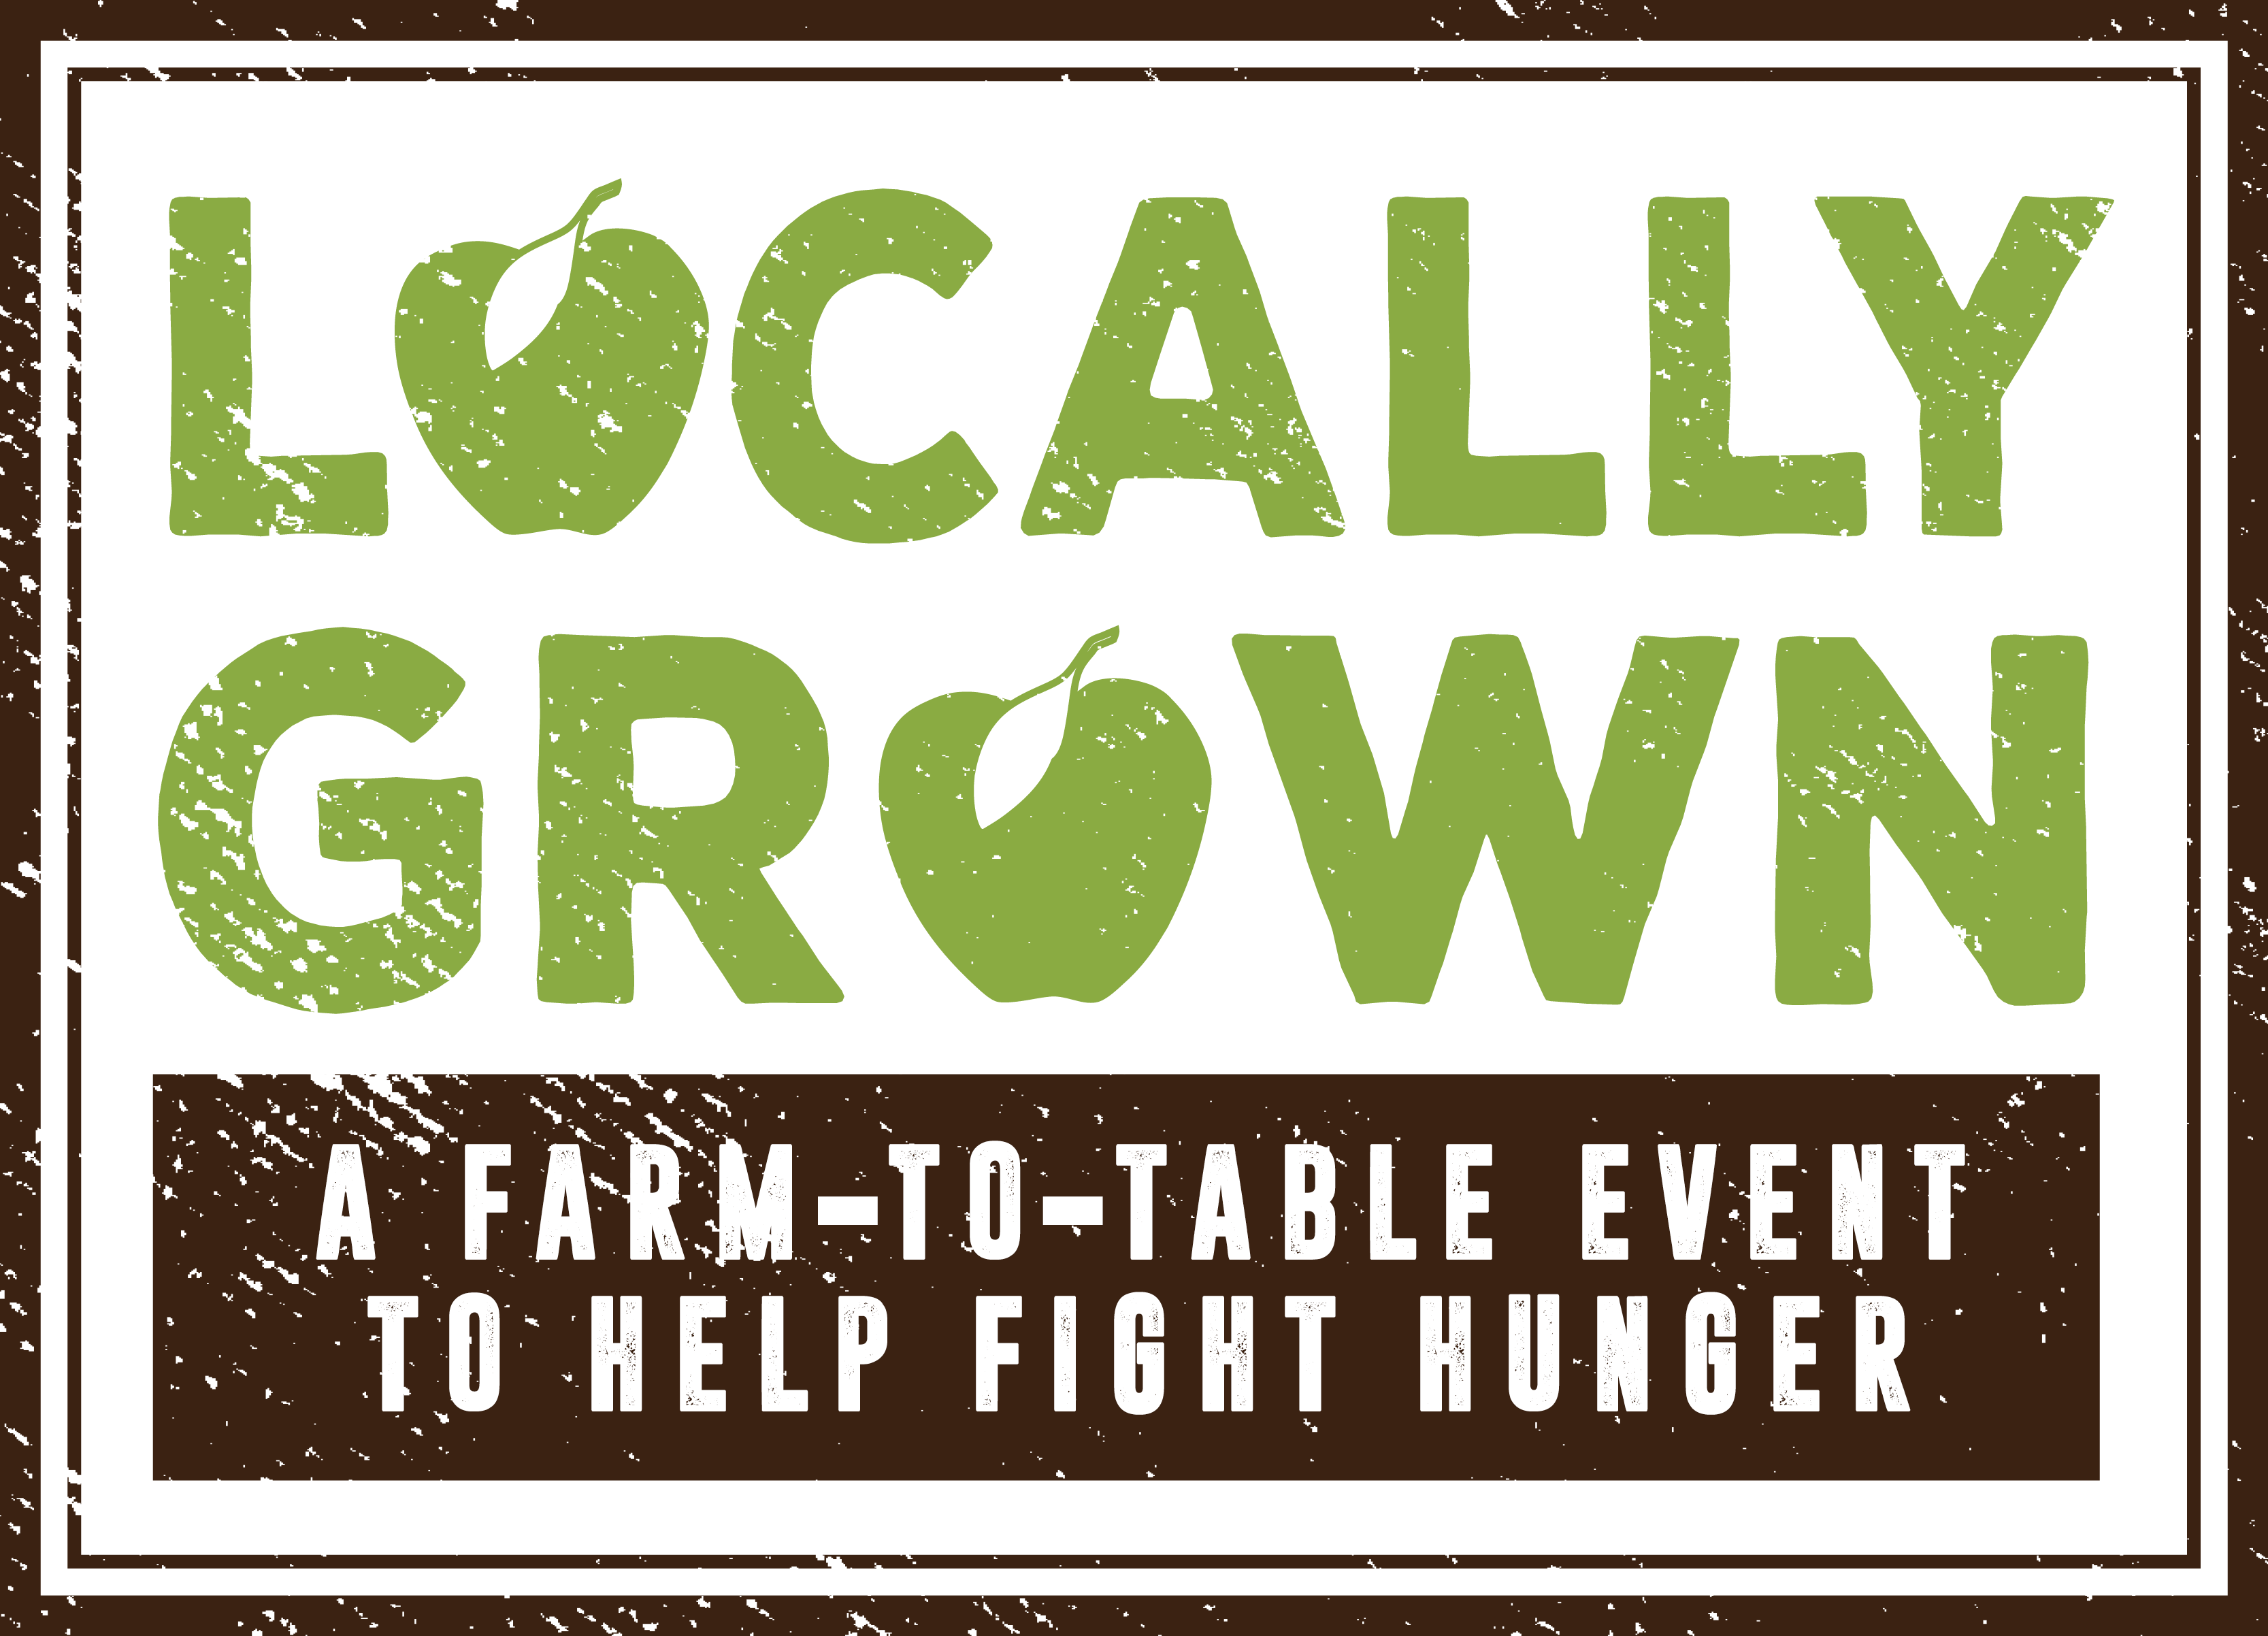 Locally Grown - a farm-to-table event to help fight hunger